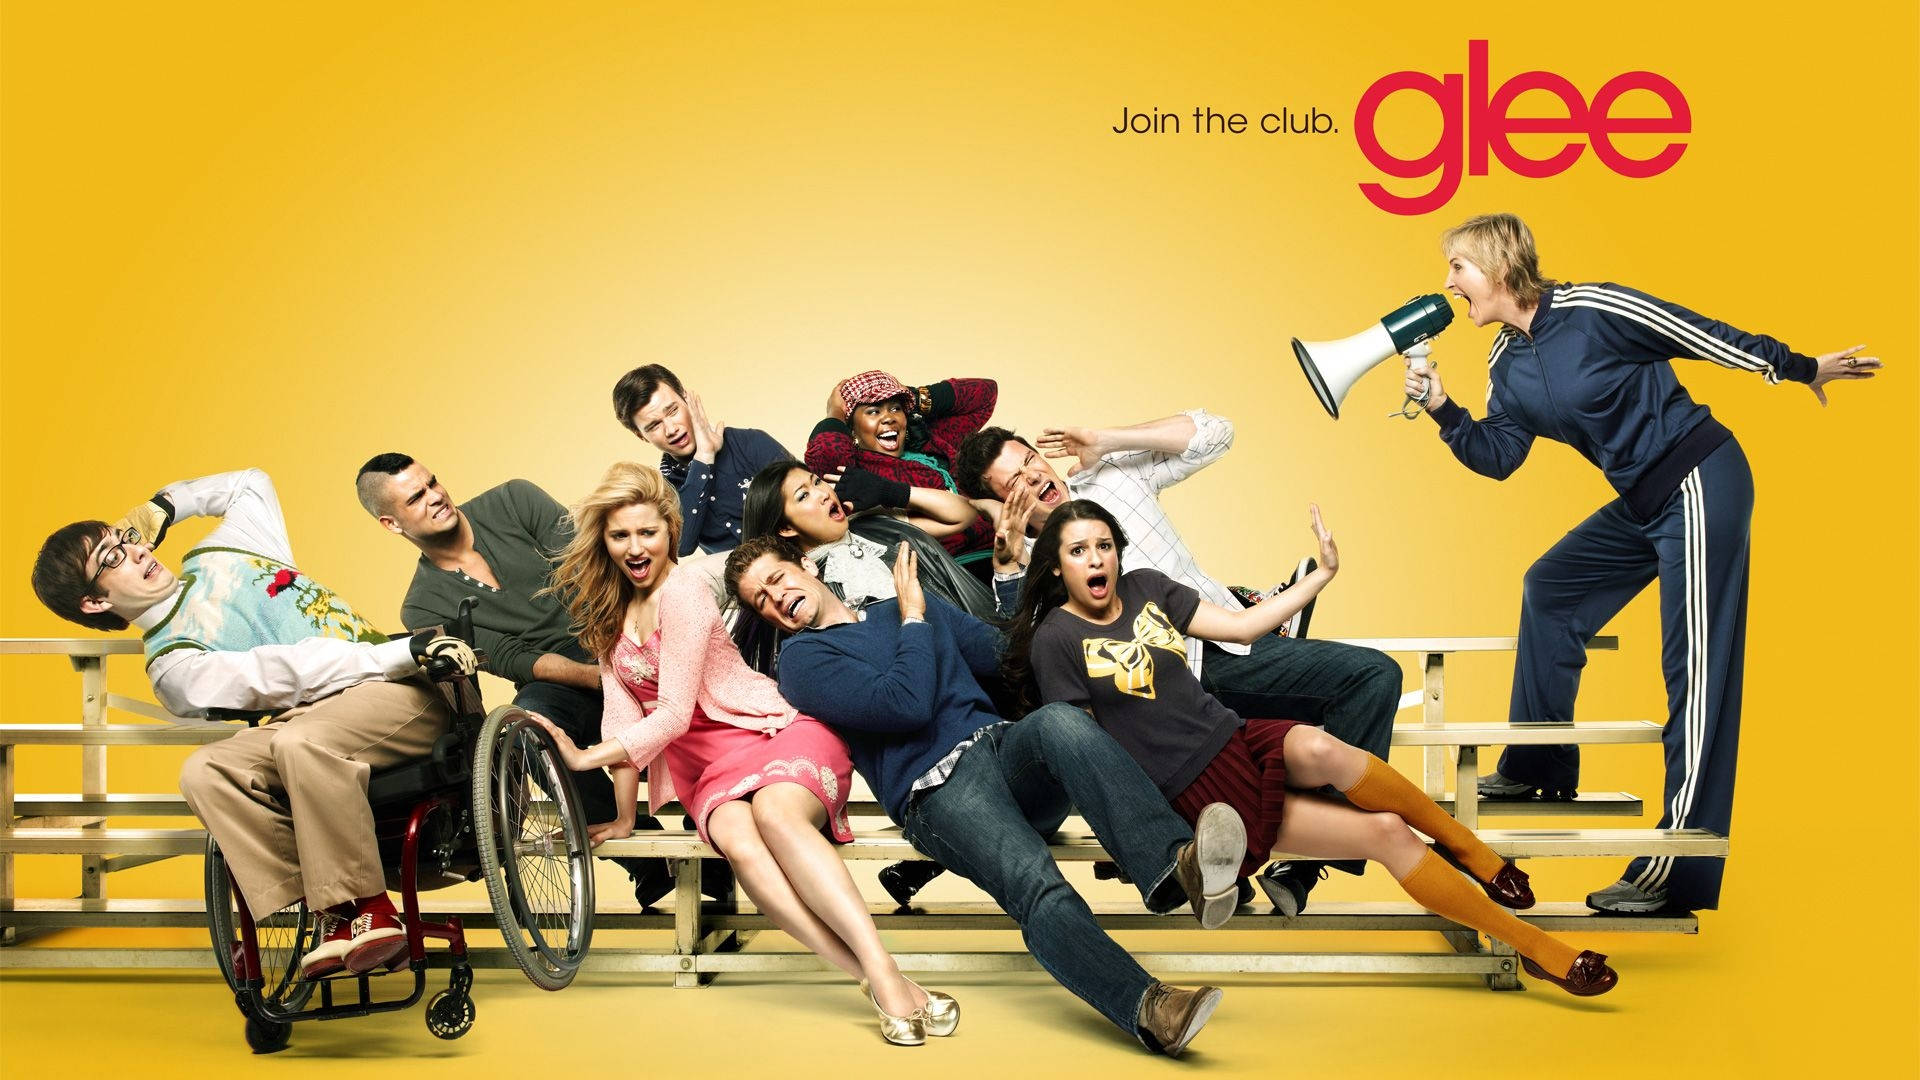 Glee Cast Members Join the Club Wallpaper